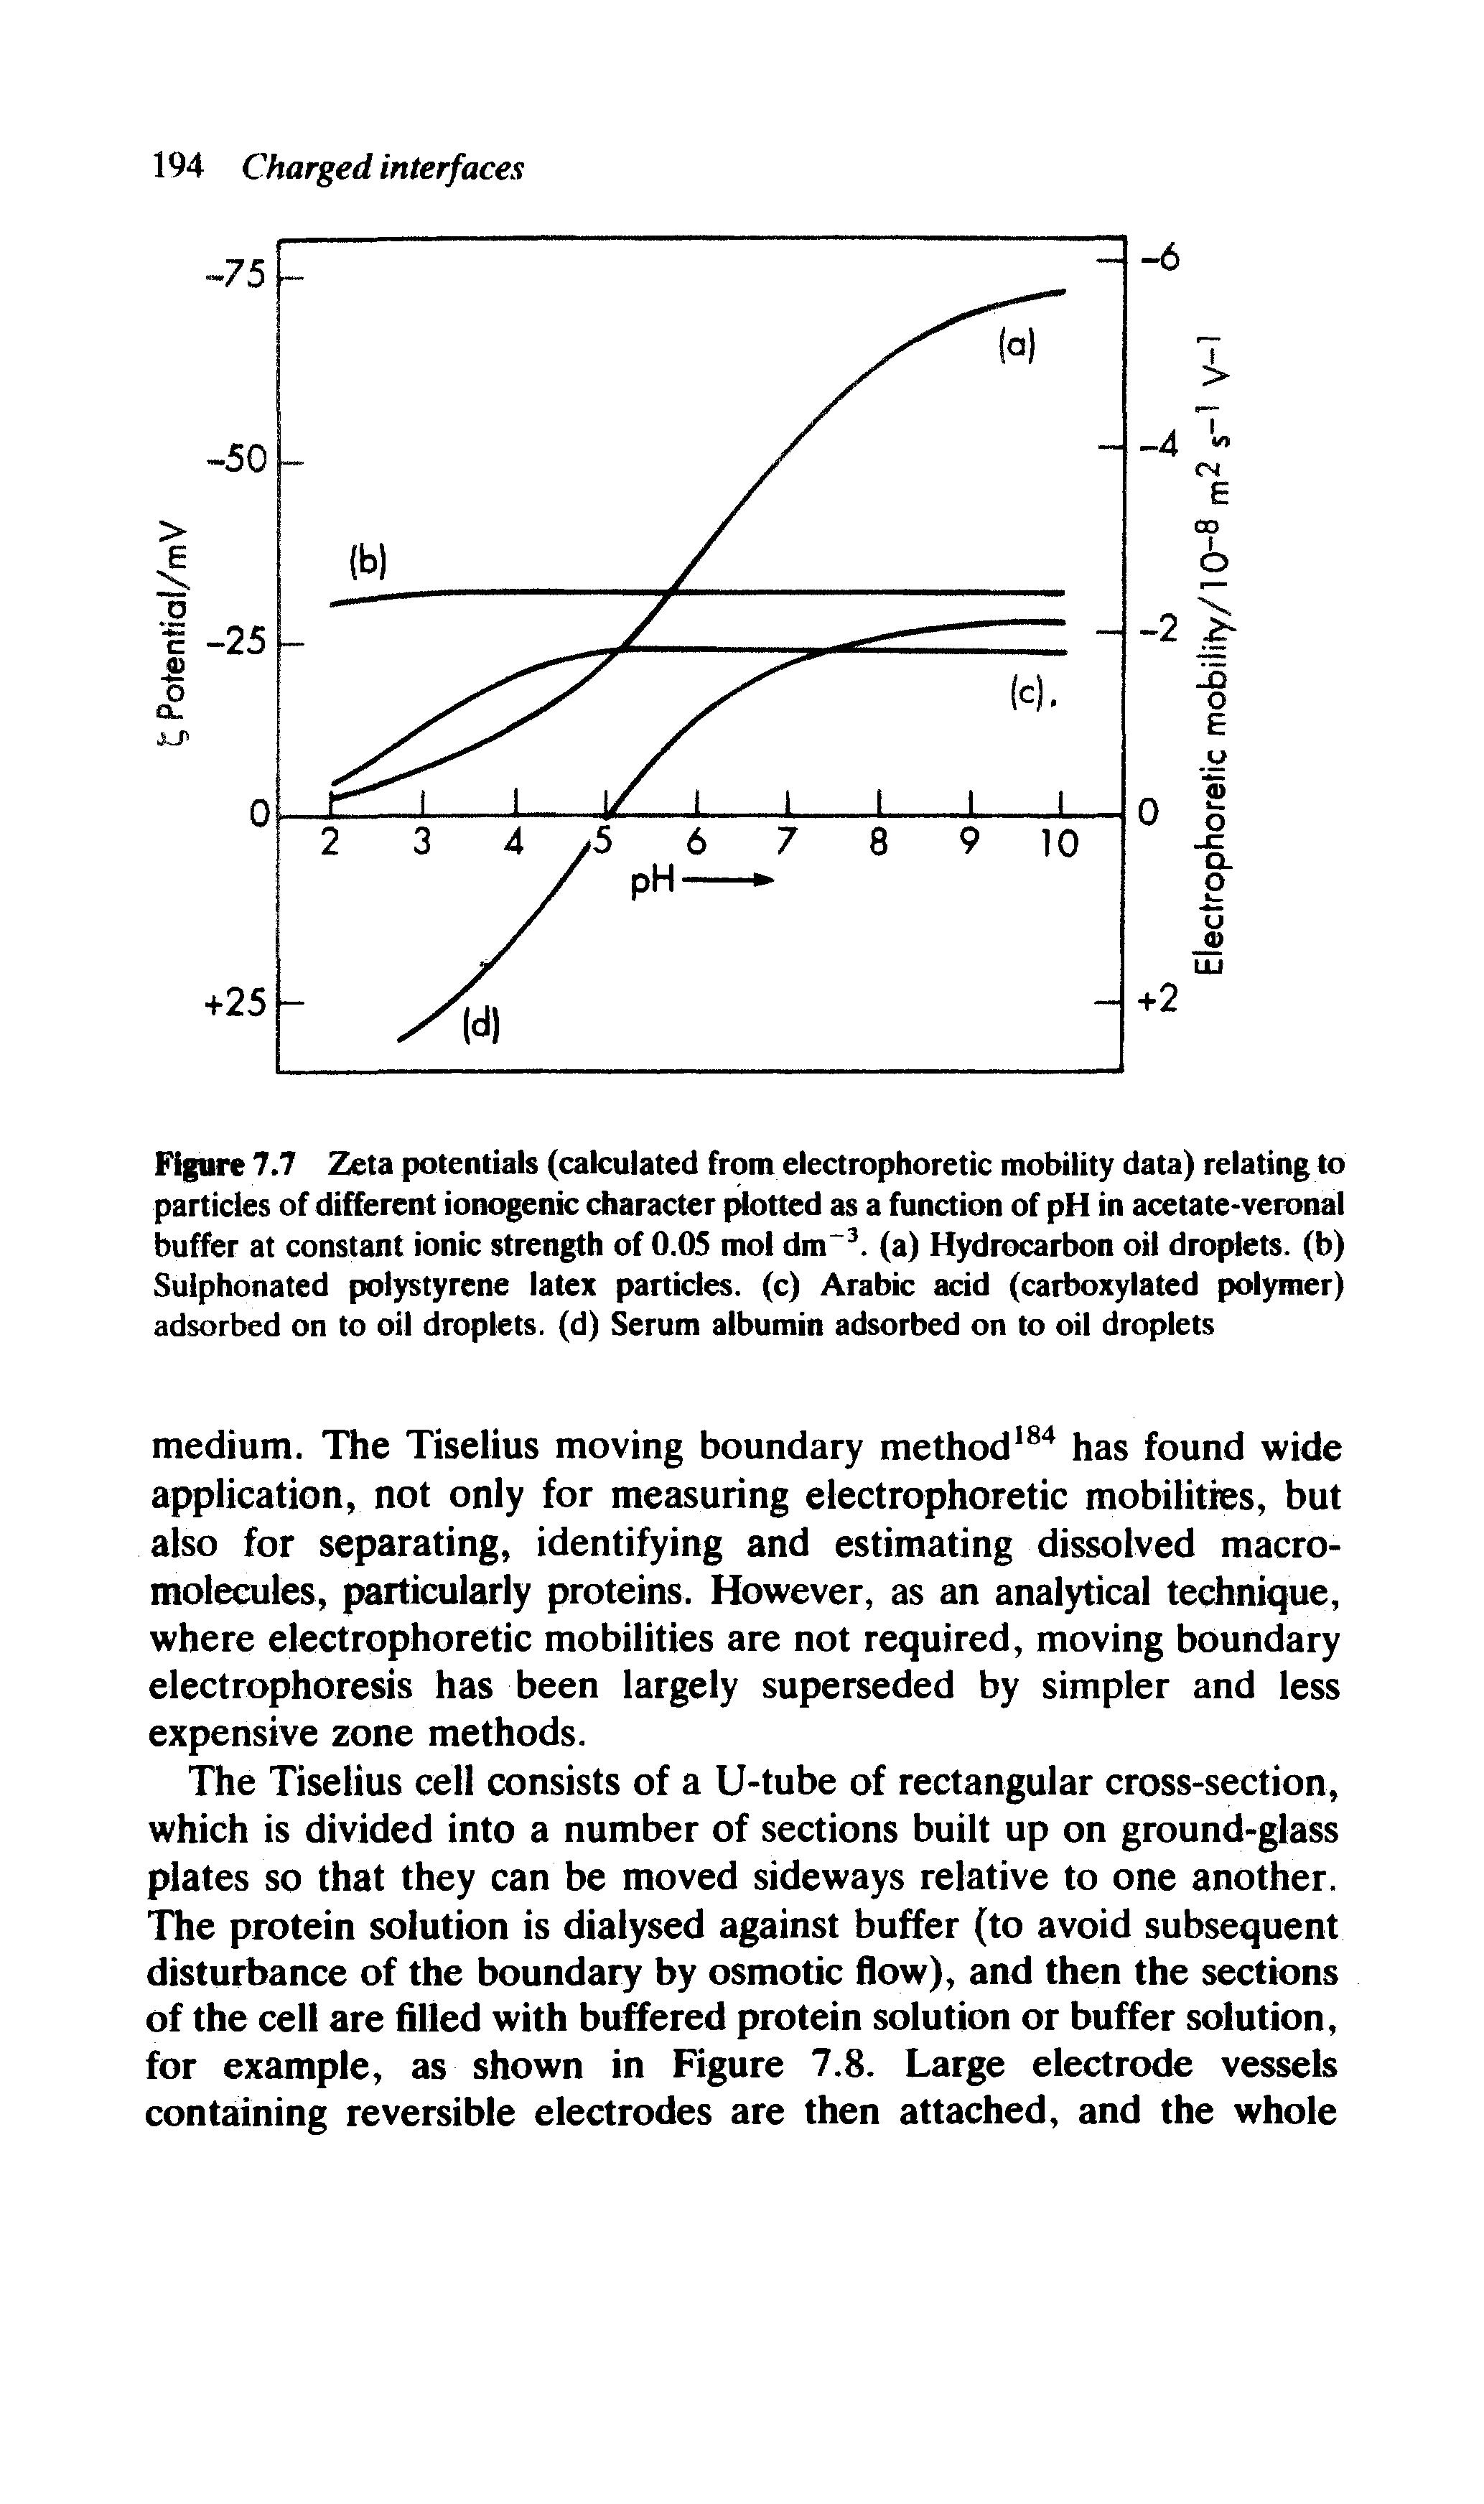 Figure 7.7 Zeta potentials (calculated from electrophoretic mobility data) relating to particles of different ionogenic character plotted as a function of pH in acetate-veronal buffer at constant ionic strength of 0.05 mol dm 3, (a) Hydrocarbon oil droplets, (b) Sulphonated polystyrene latex particles, (c) Arabic acid (carboxylated polymer) adsorbed on to oil droplets, (d) Serum albumin adsorbed on to oil droplets...